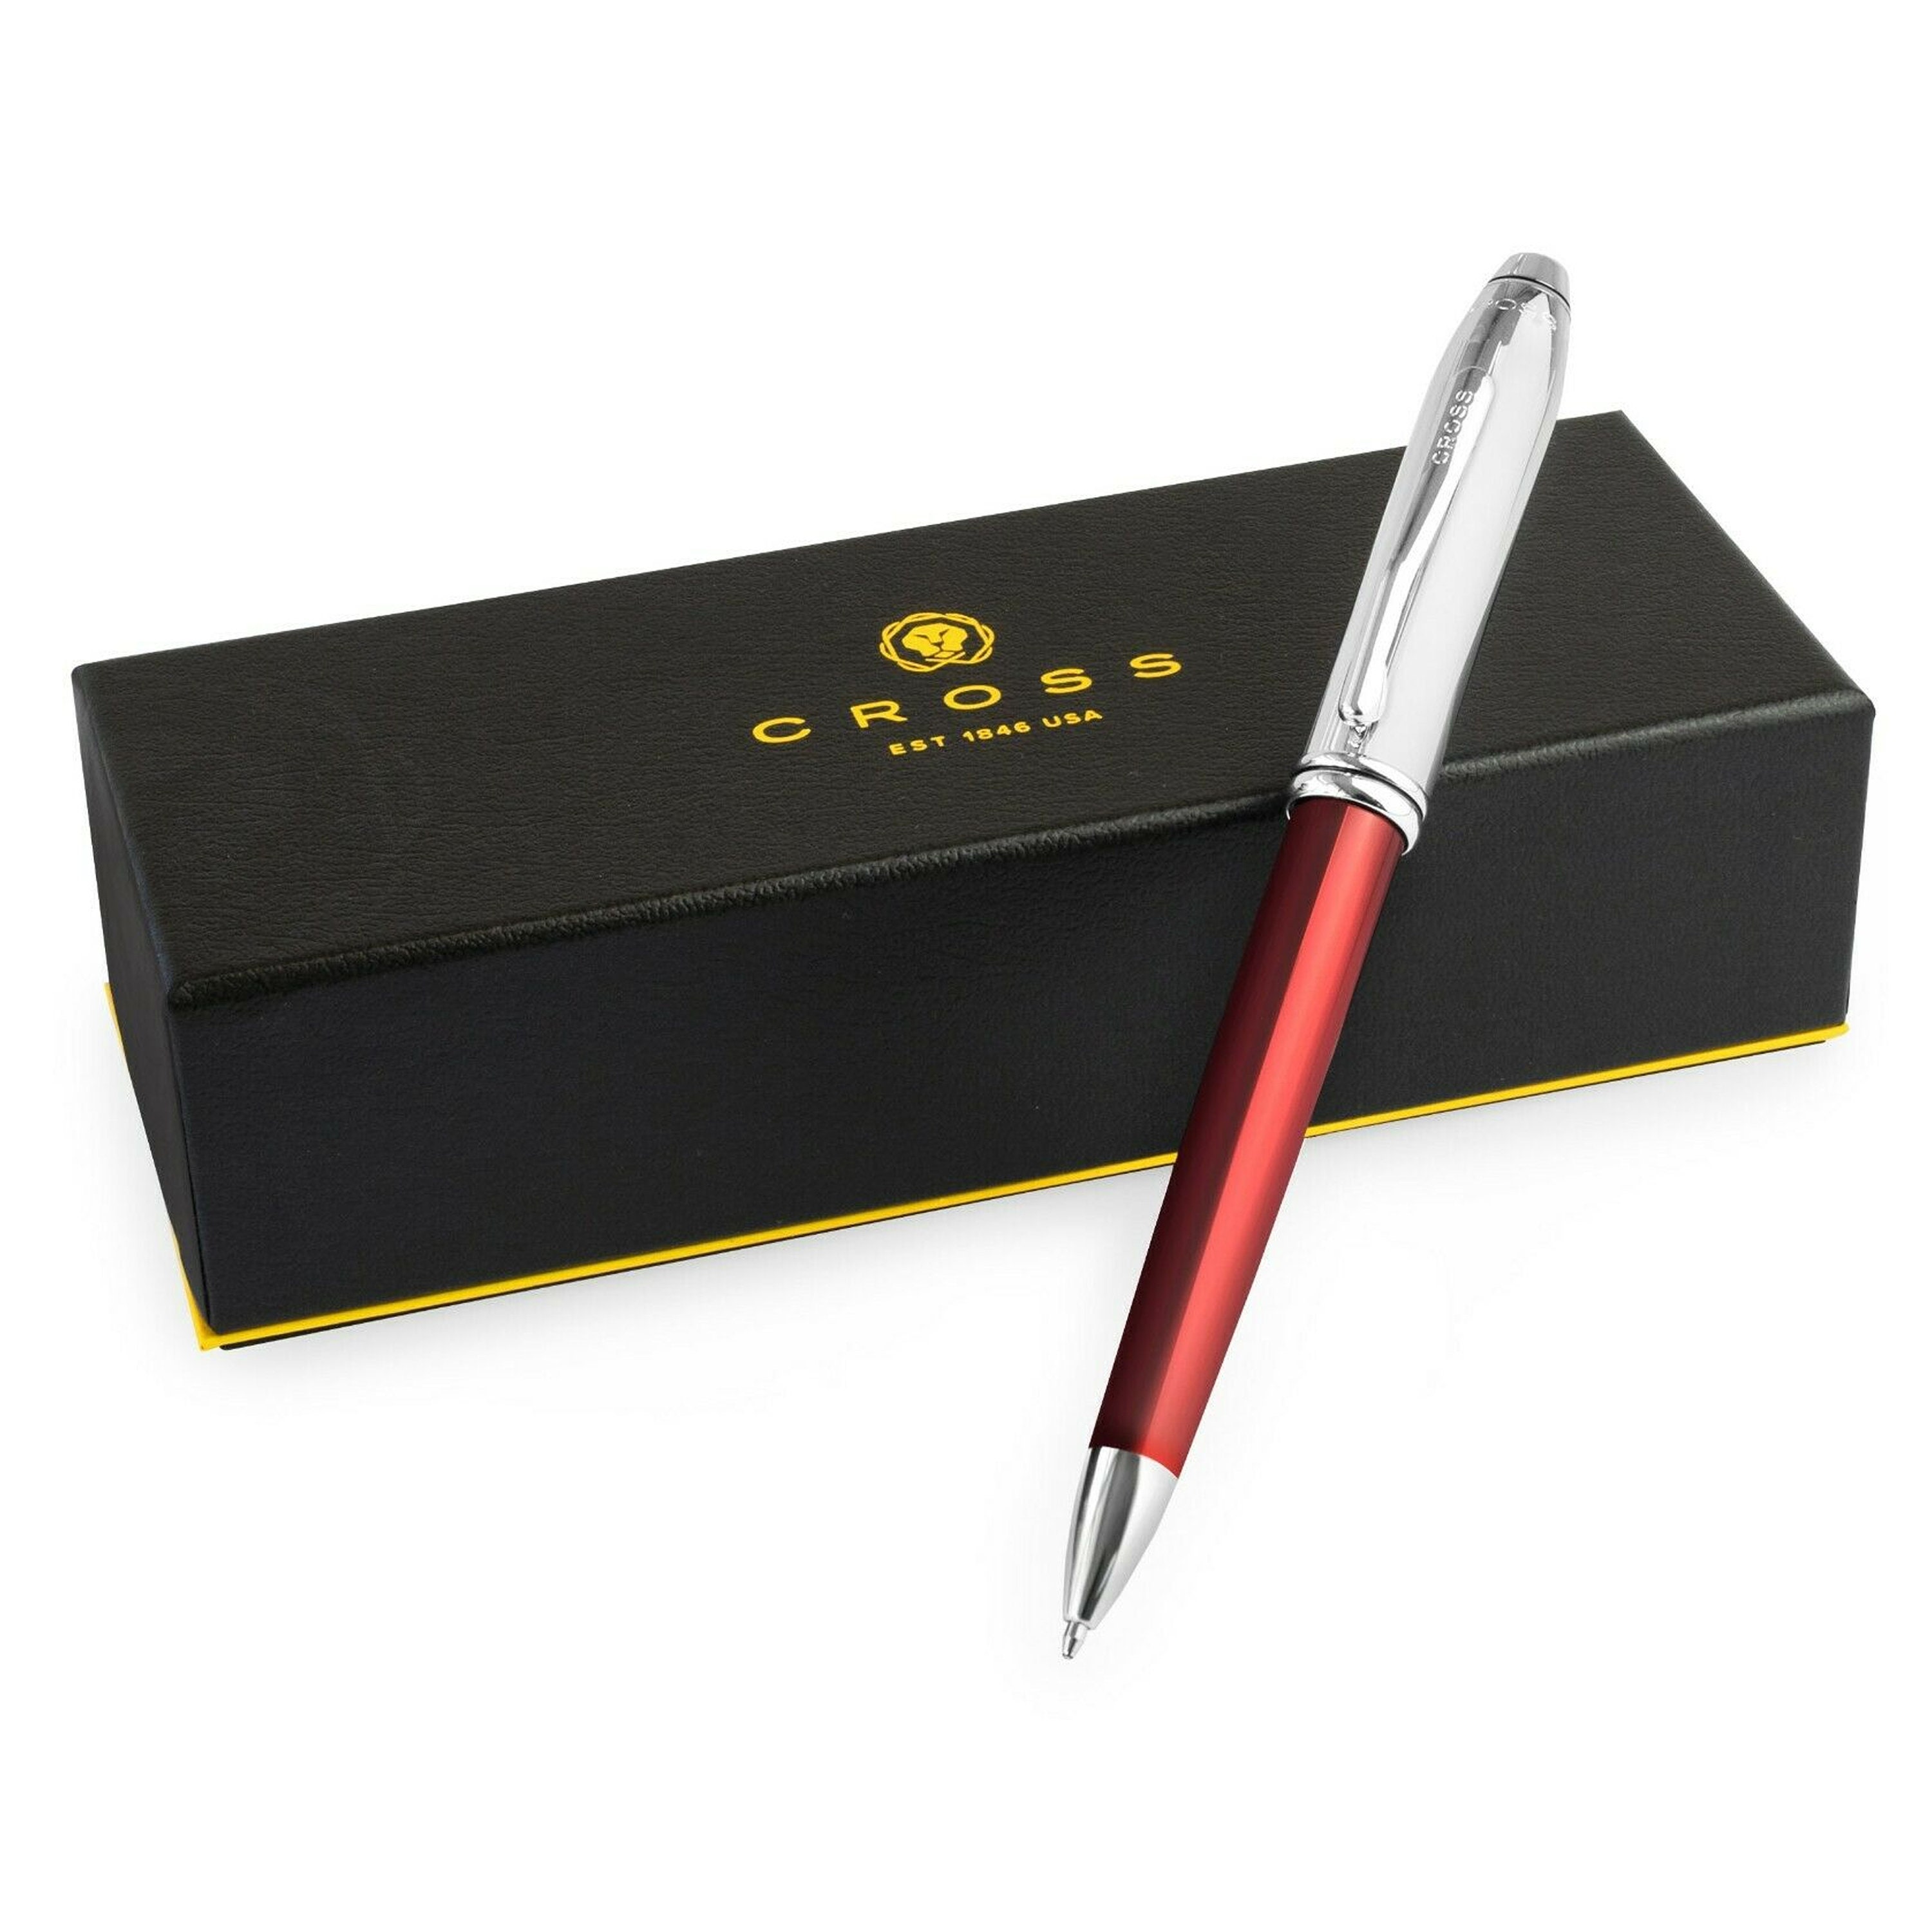 Cross Townsend Ballpoint Pen Medium Nib Red and Chrome Barrel Black Ink  Gift Boxed Smooth Pens Stationery for Office Work School -  Hong Kong